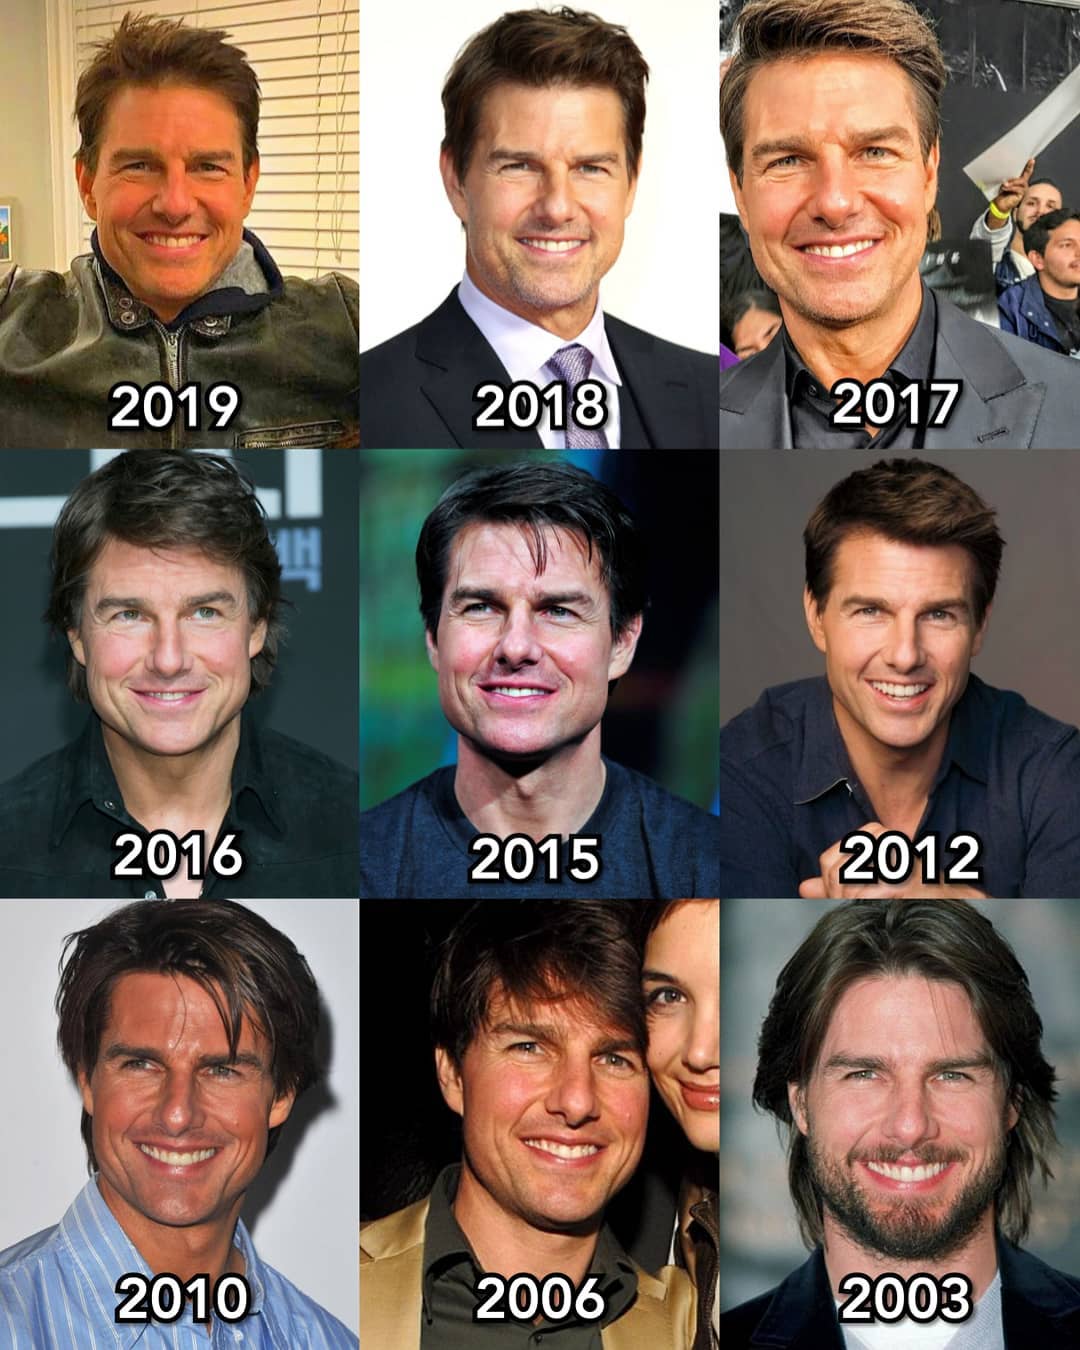 Best Tom Cruise Hairstyle From 1989 To 2020 | Men's Style